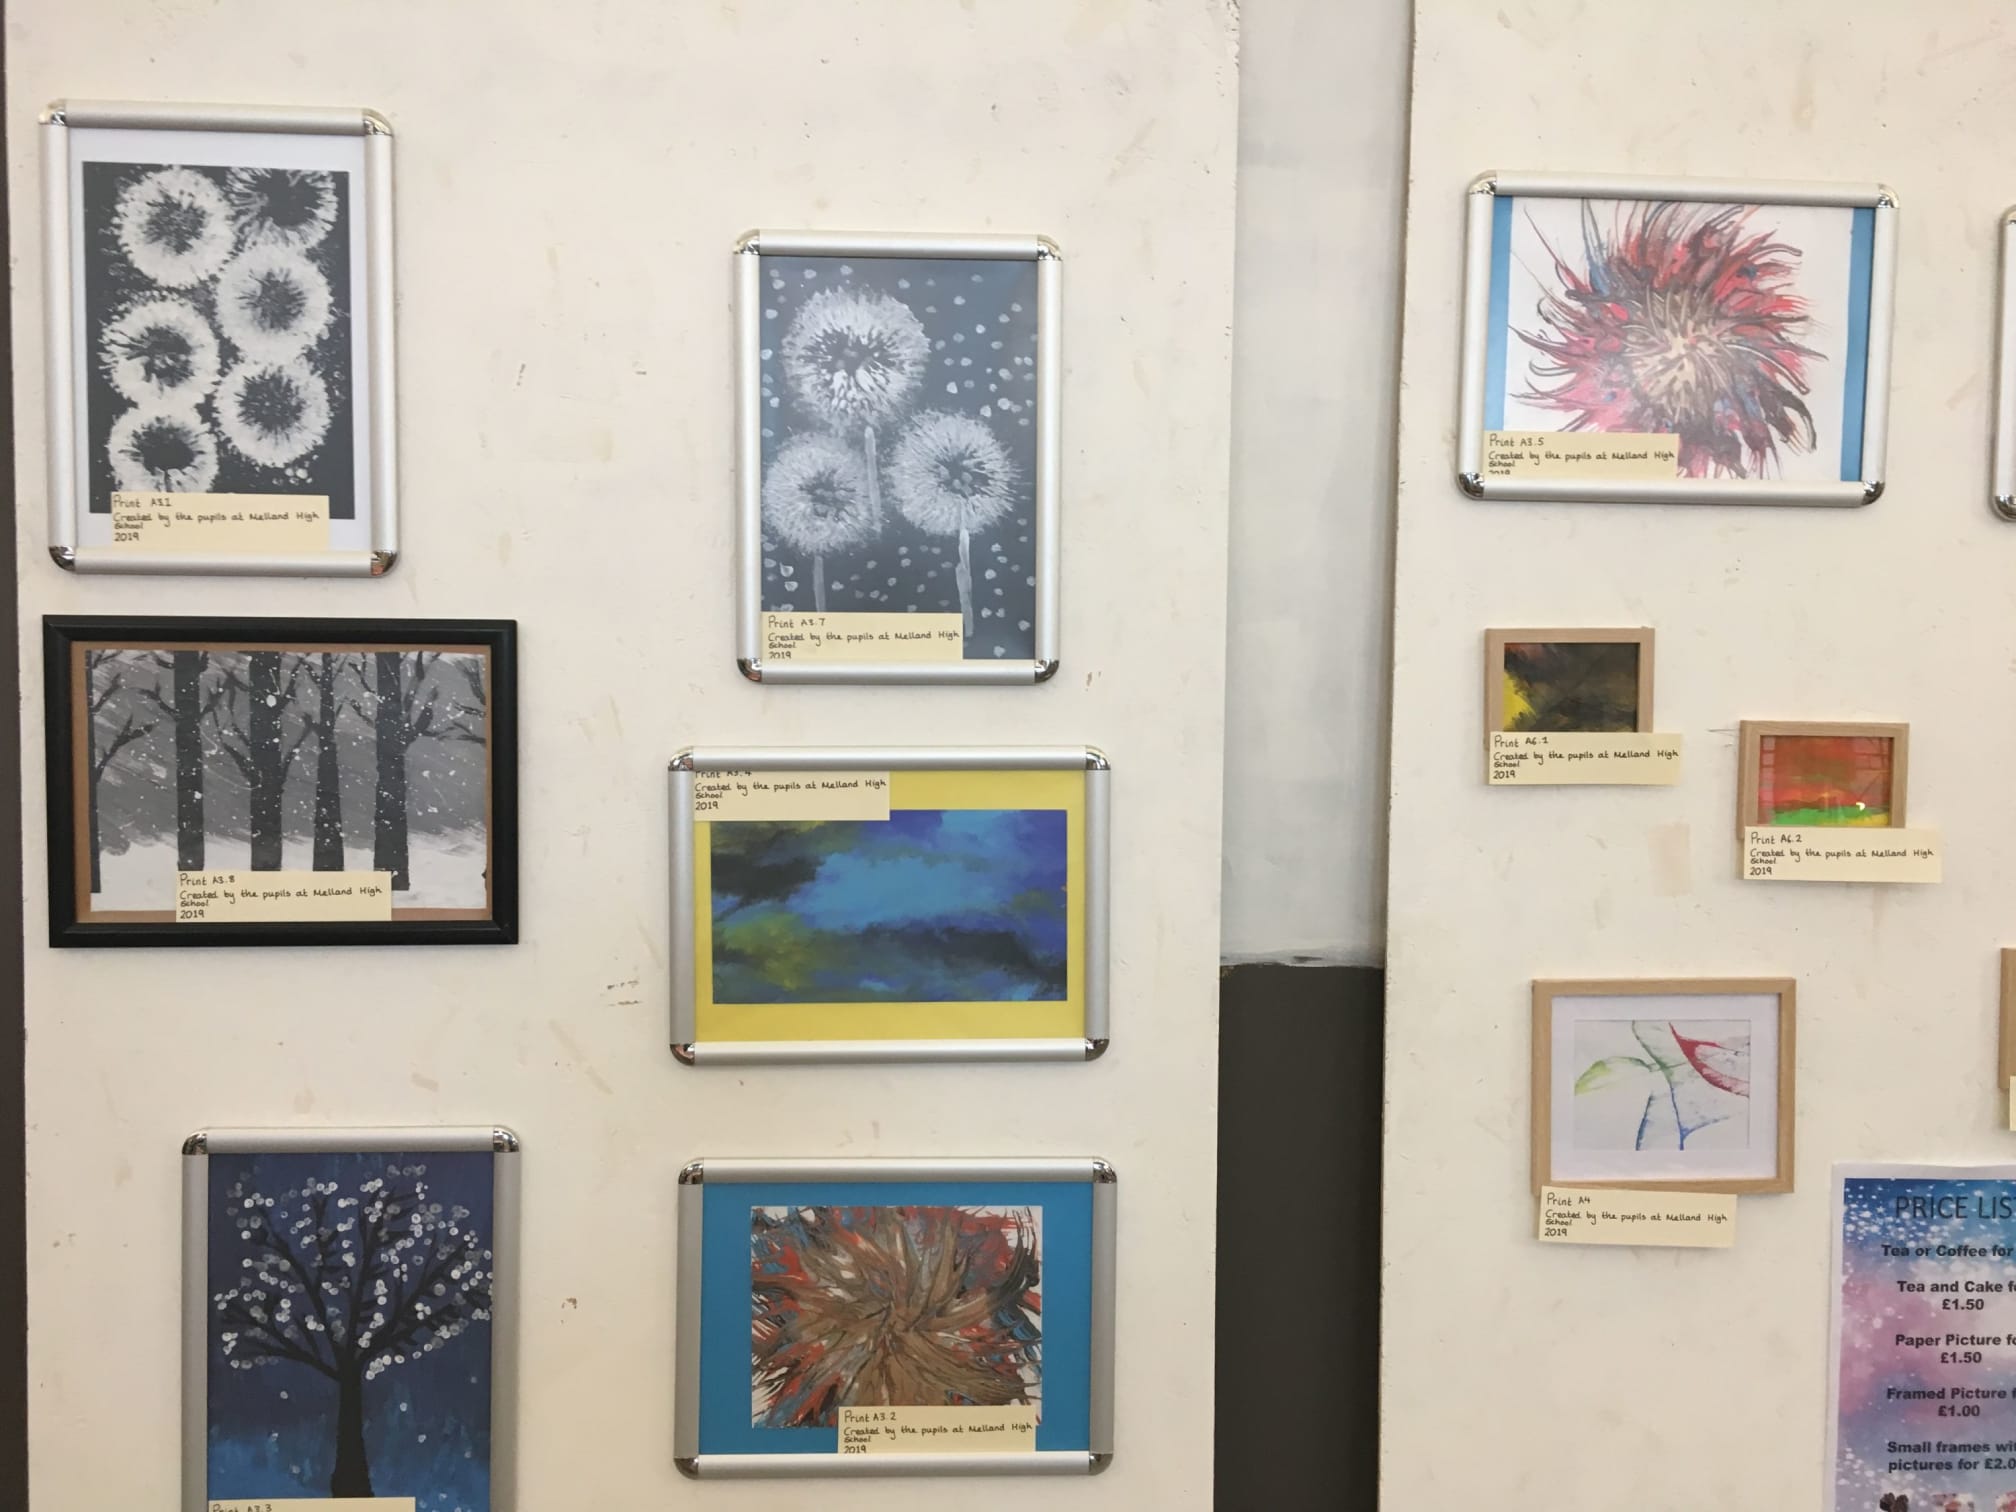 Some of the artwork created by the Co-operative (ad)Venture participants